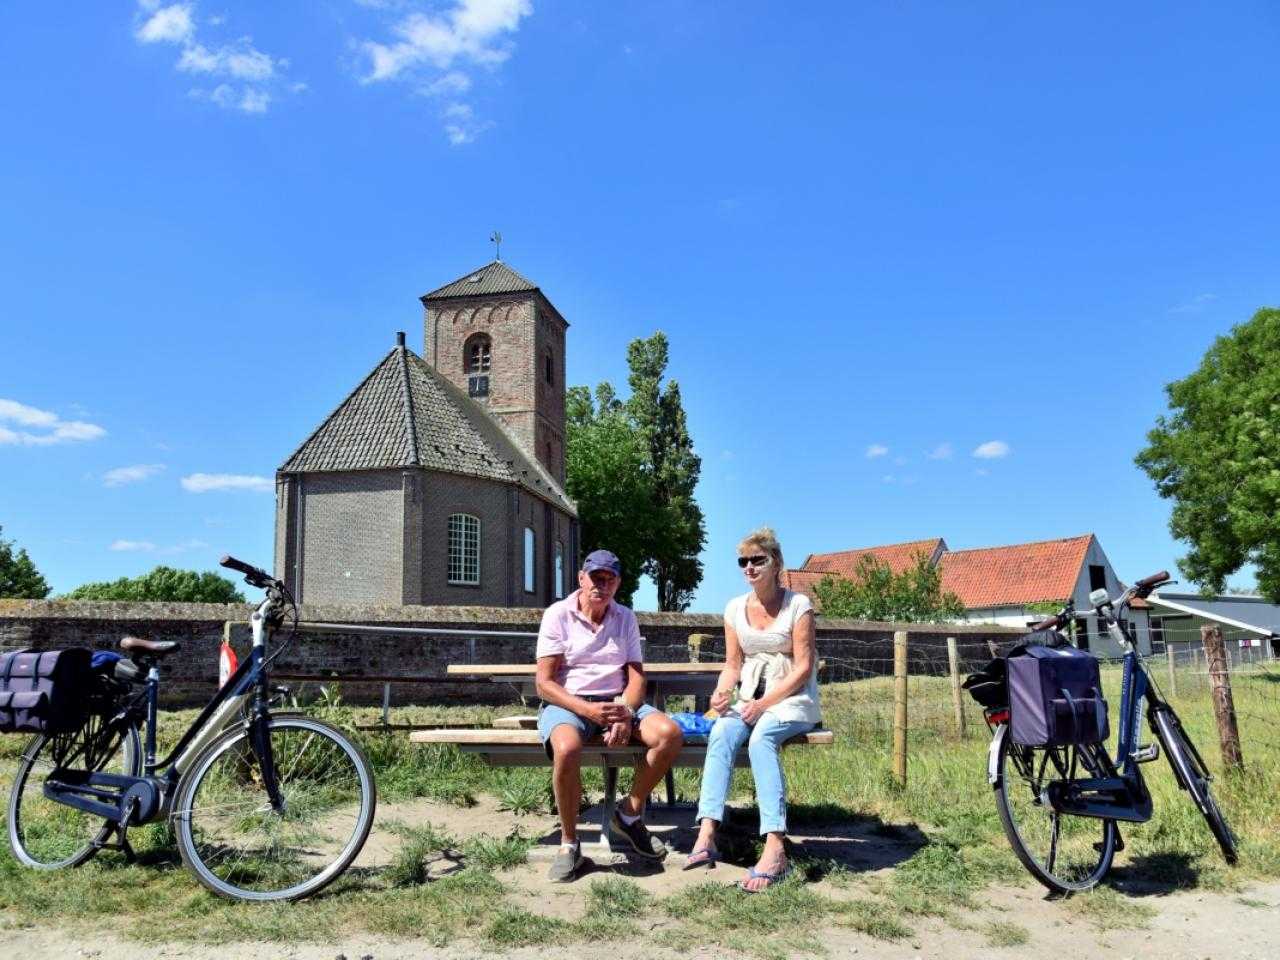 Man and woman on a bench with bicycles next to them with a stubby tower in the background